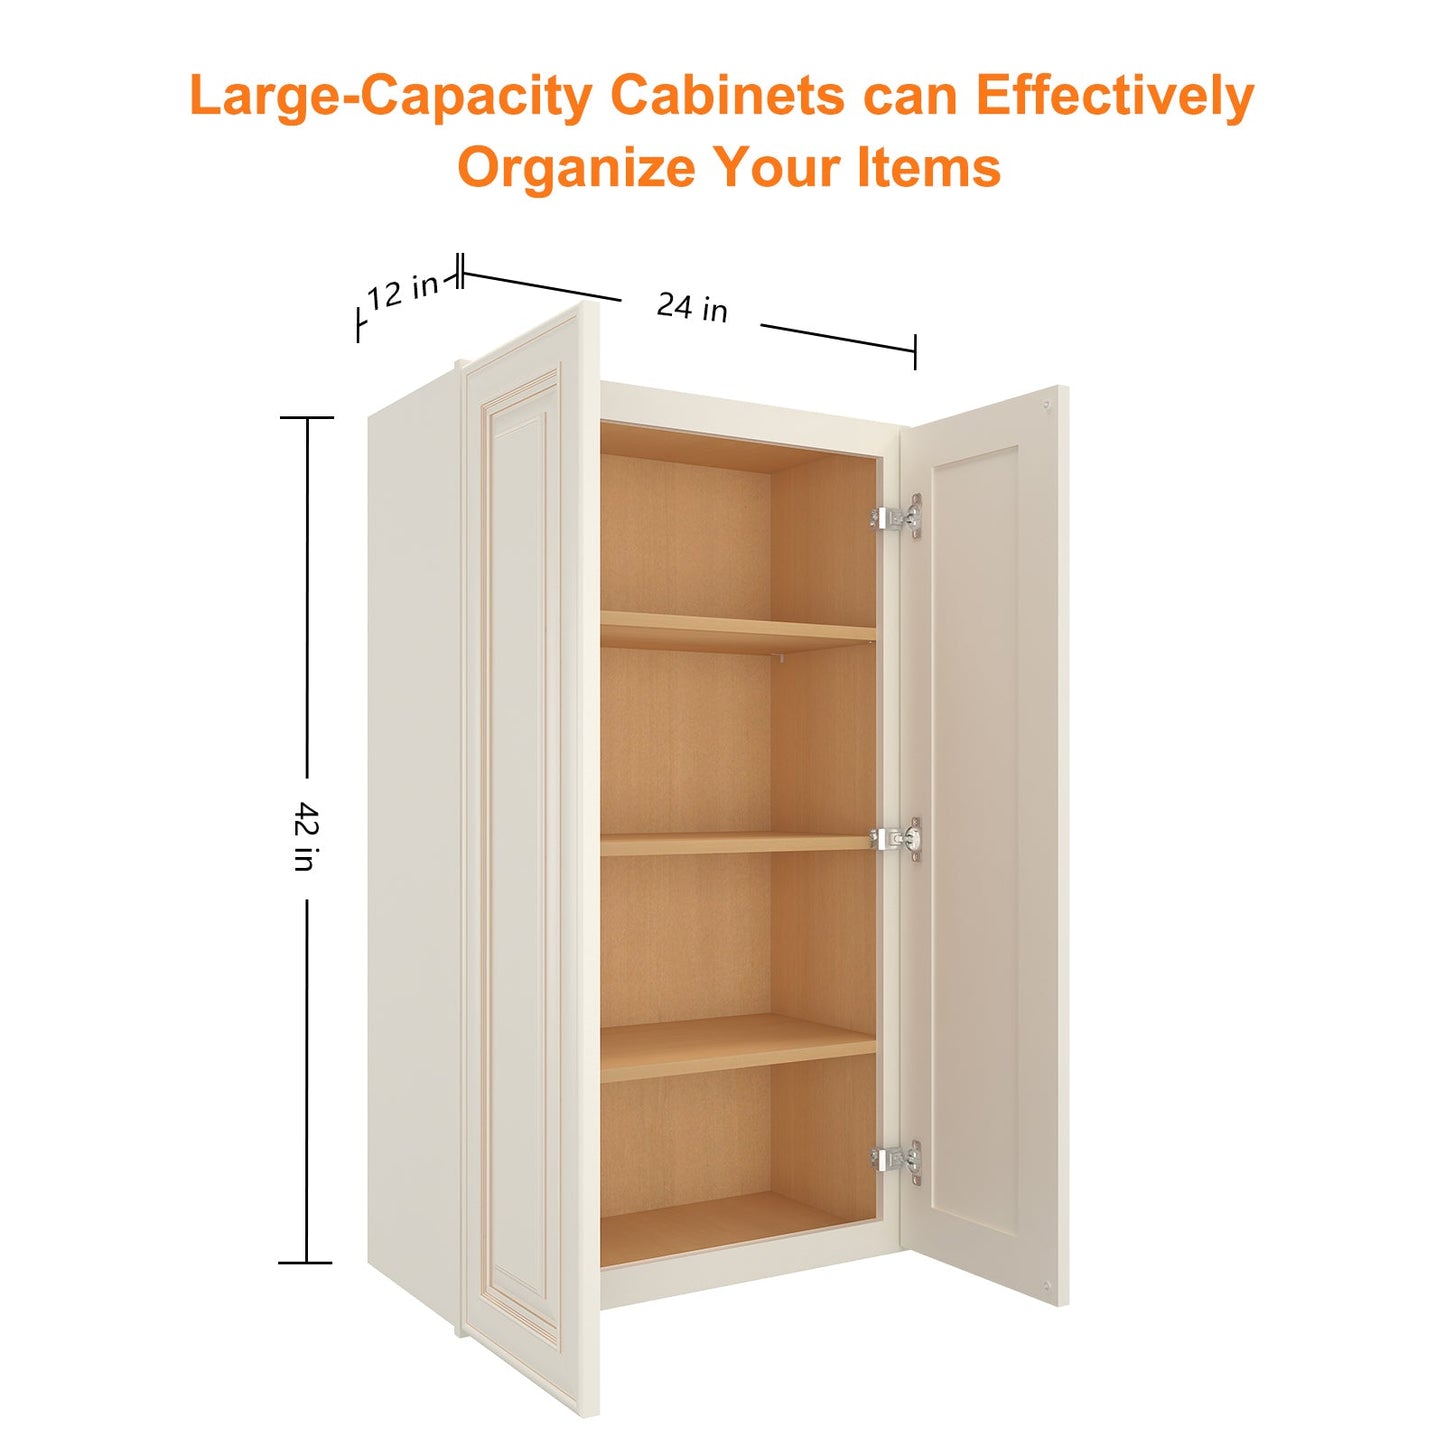 Medicine Cabinet Wall Mounted W2442